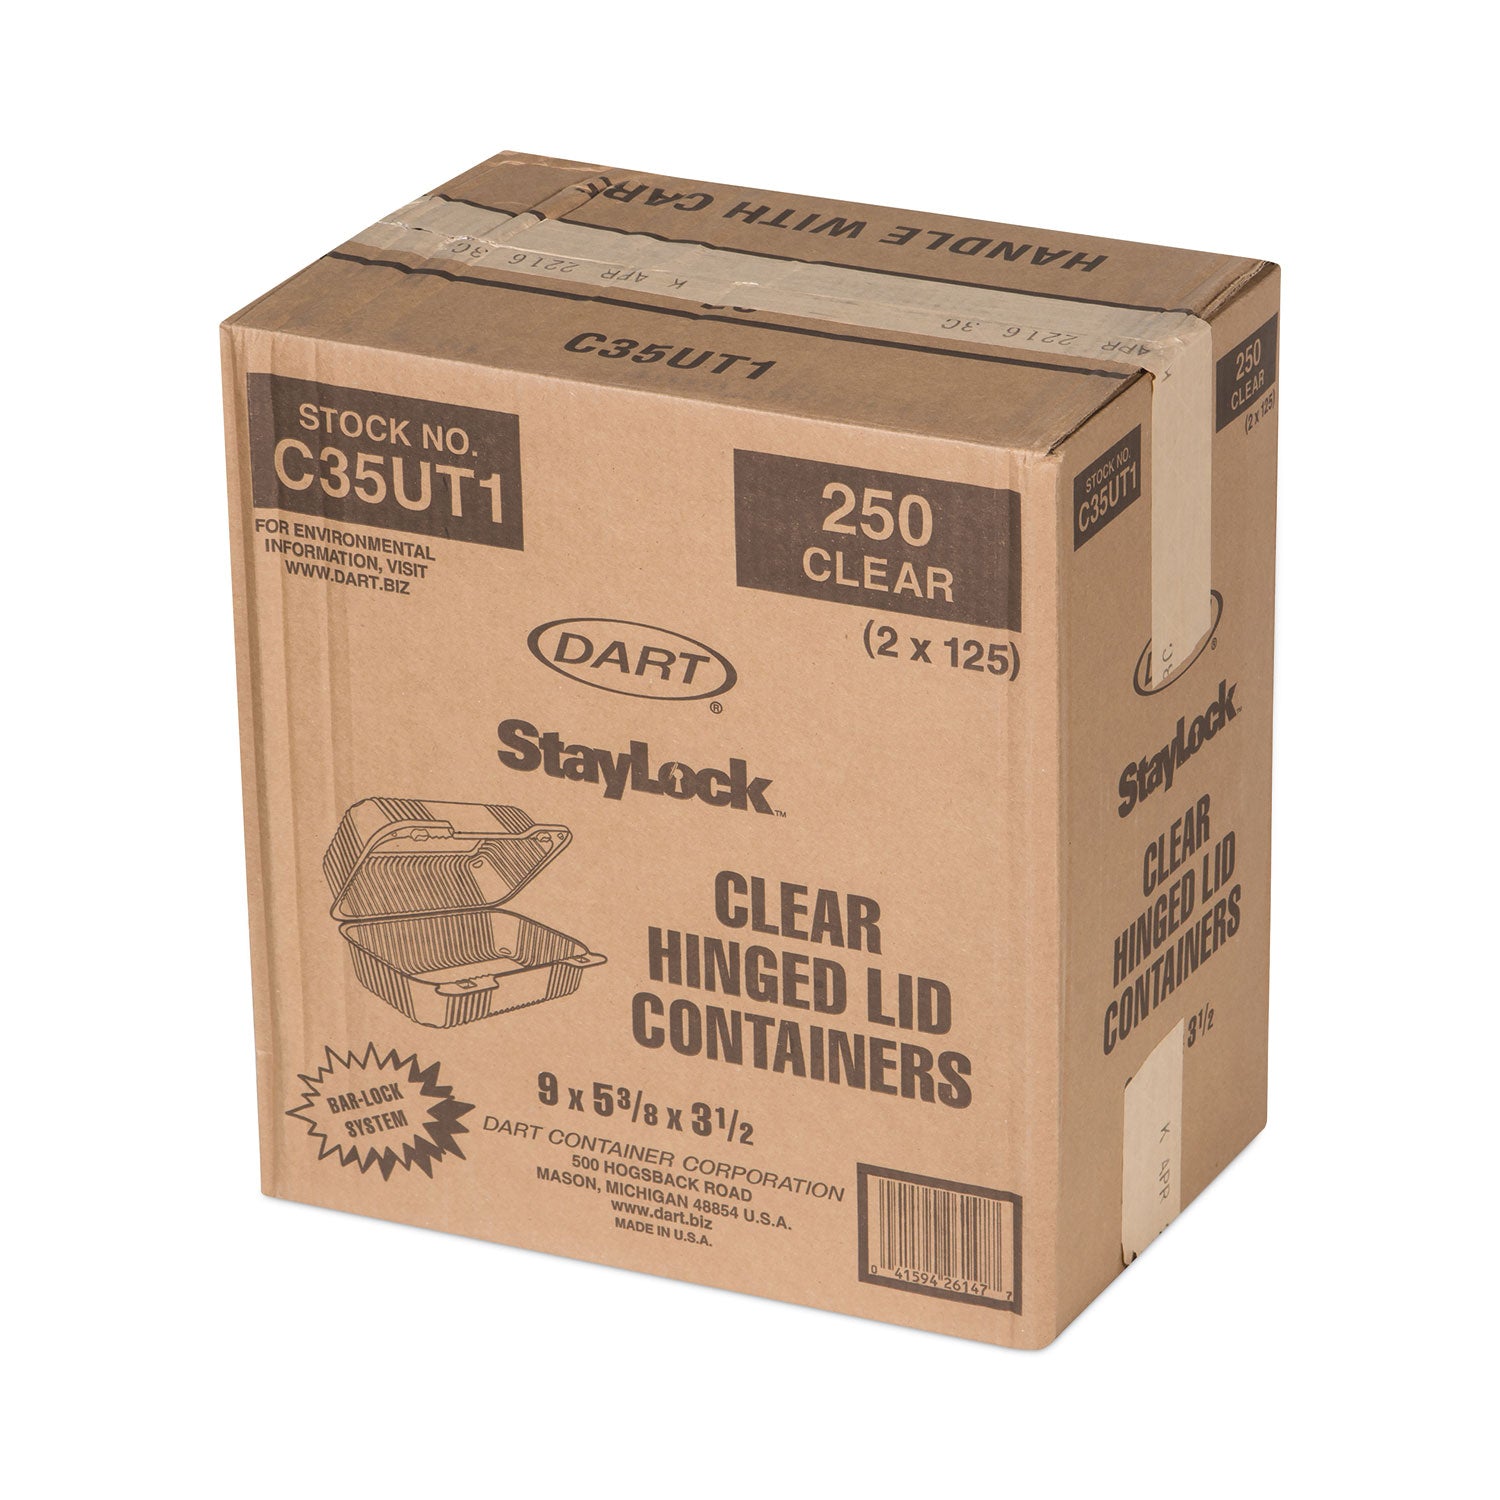 staylock-clear-hinged-lid-containers-54-x-9-x-35-clear-plastic-250-carton_dccc35ut1 - 2